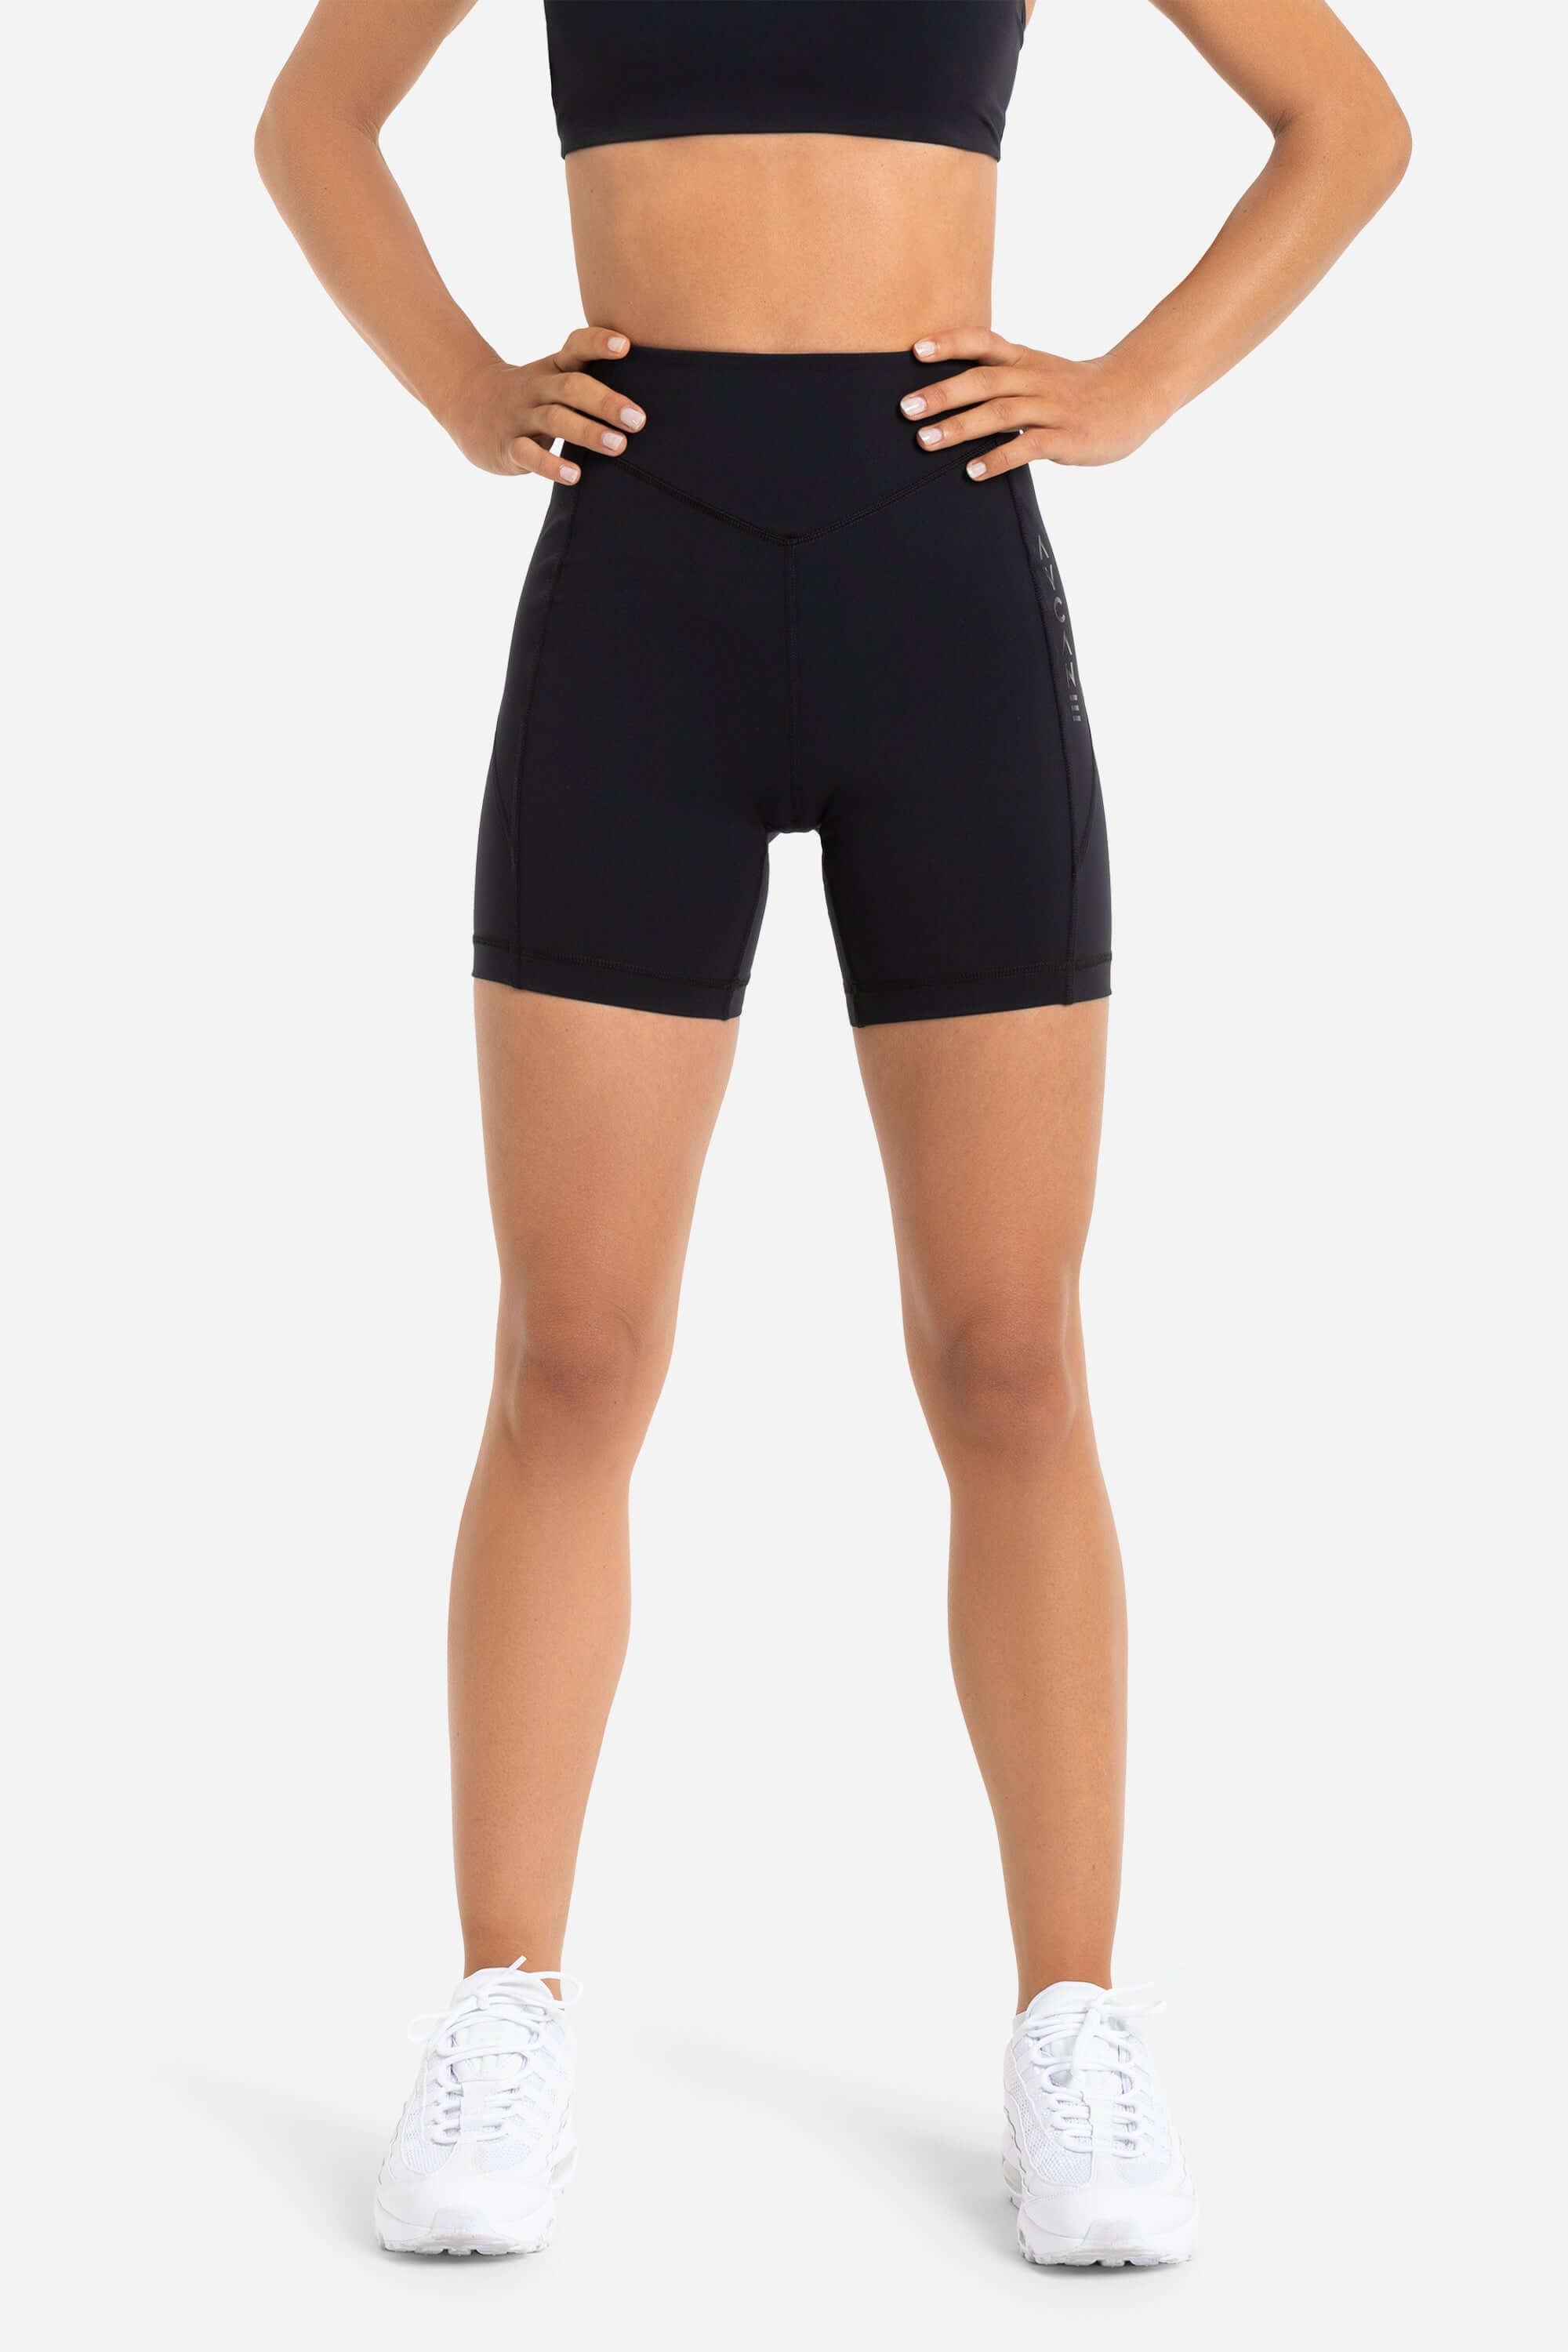 women in workout short tights in black